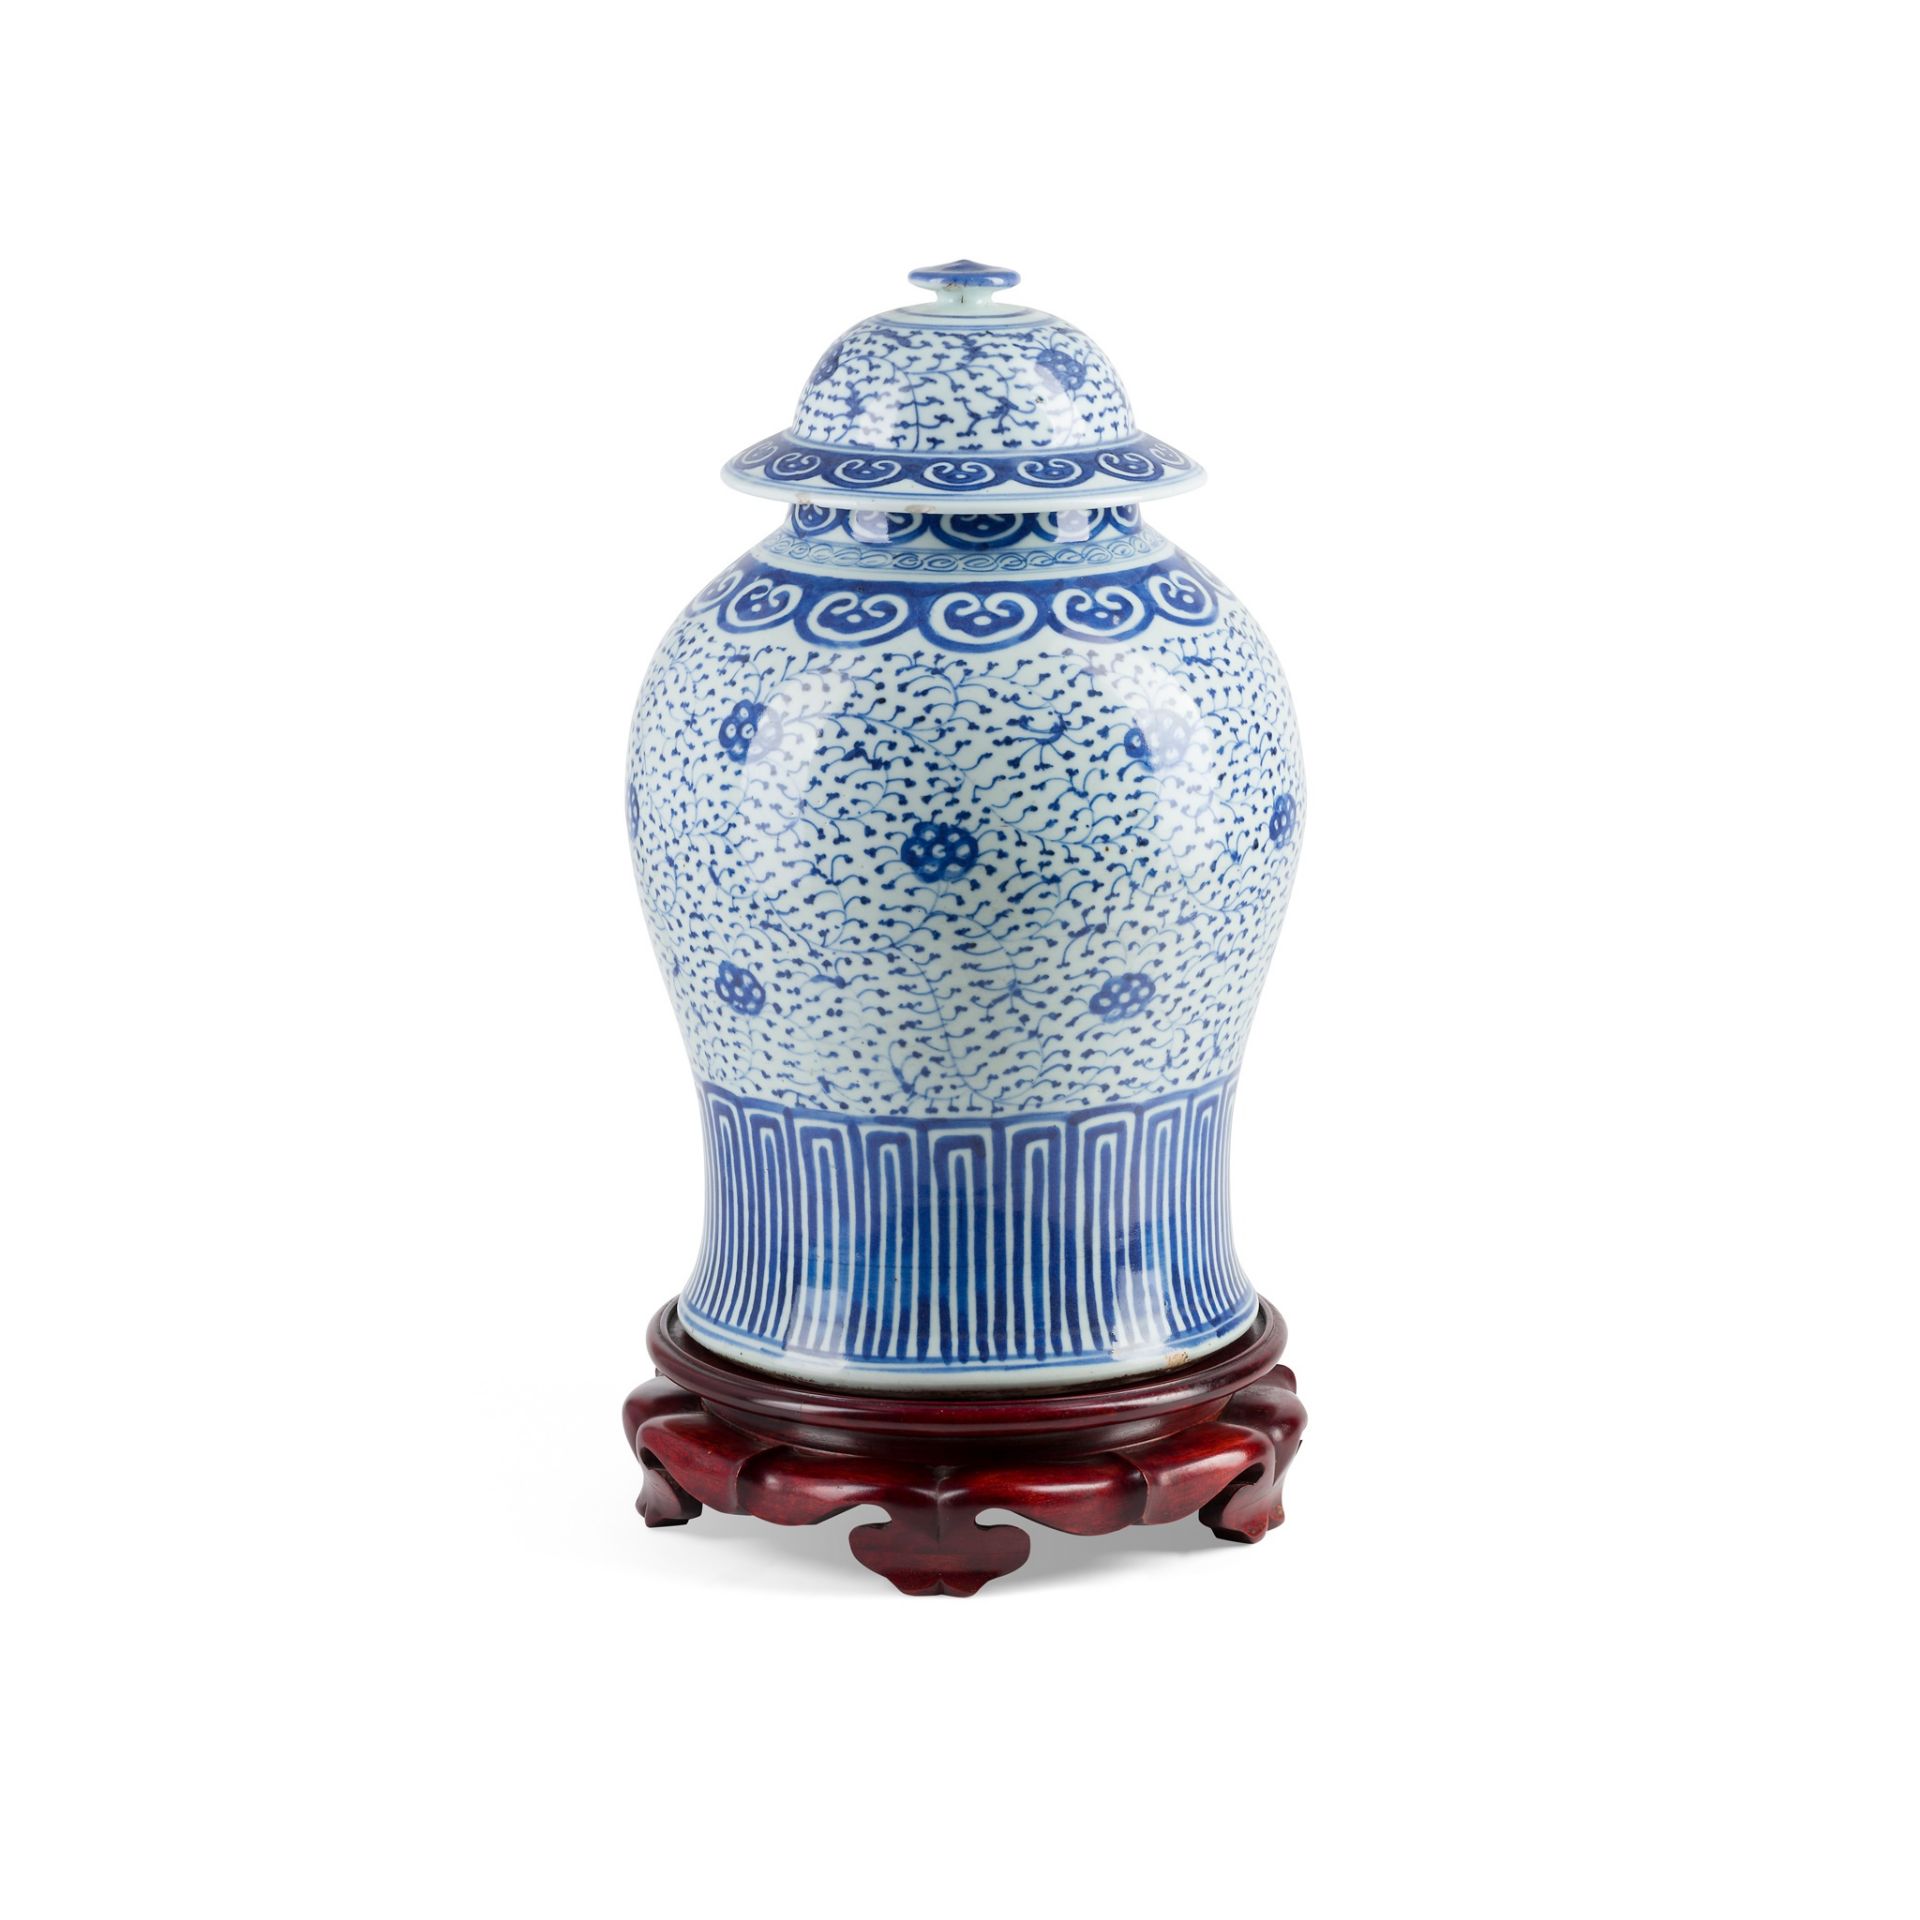 CHINESE BLUE AND WHITE PORCELAIN GINGER JAR LATE QING DYNASTY/REPUBLIC PERIOD, 19TH-20TH CENTURY